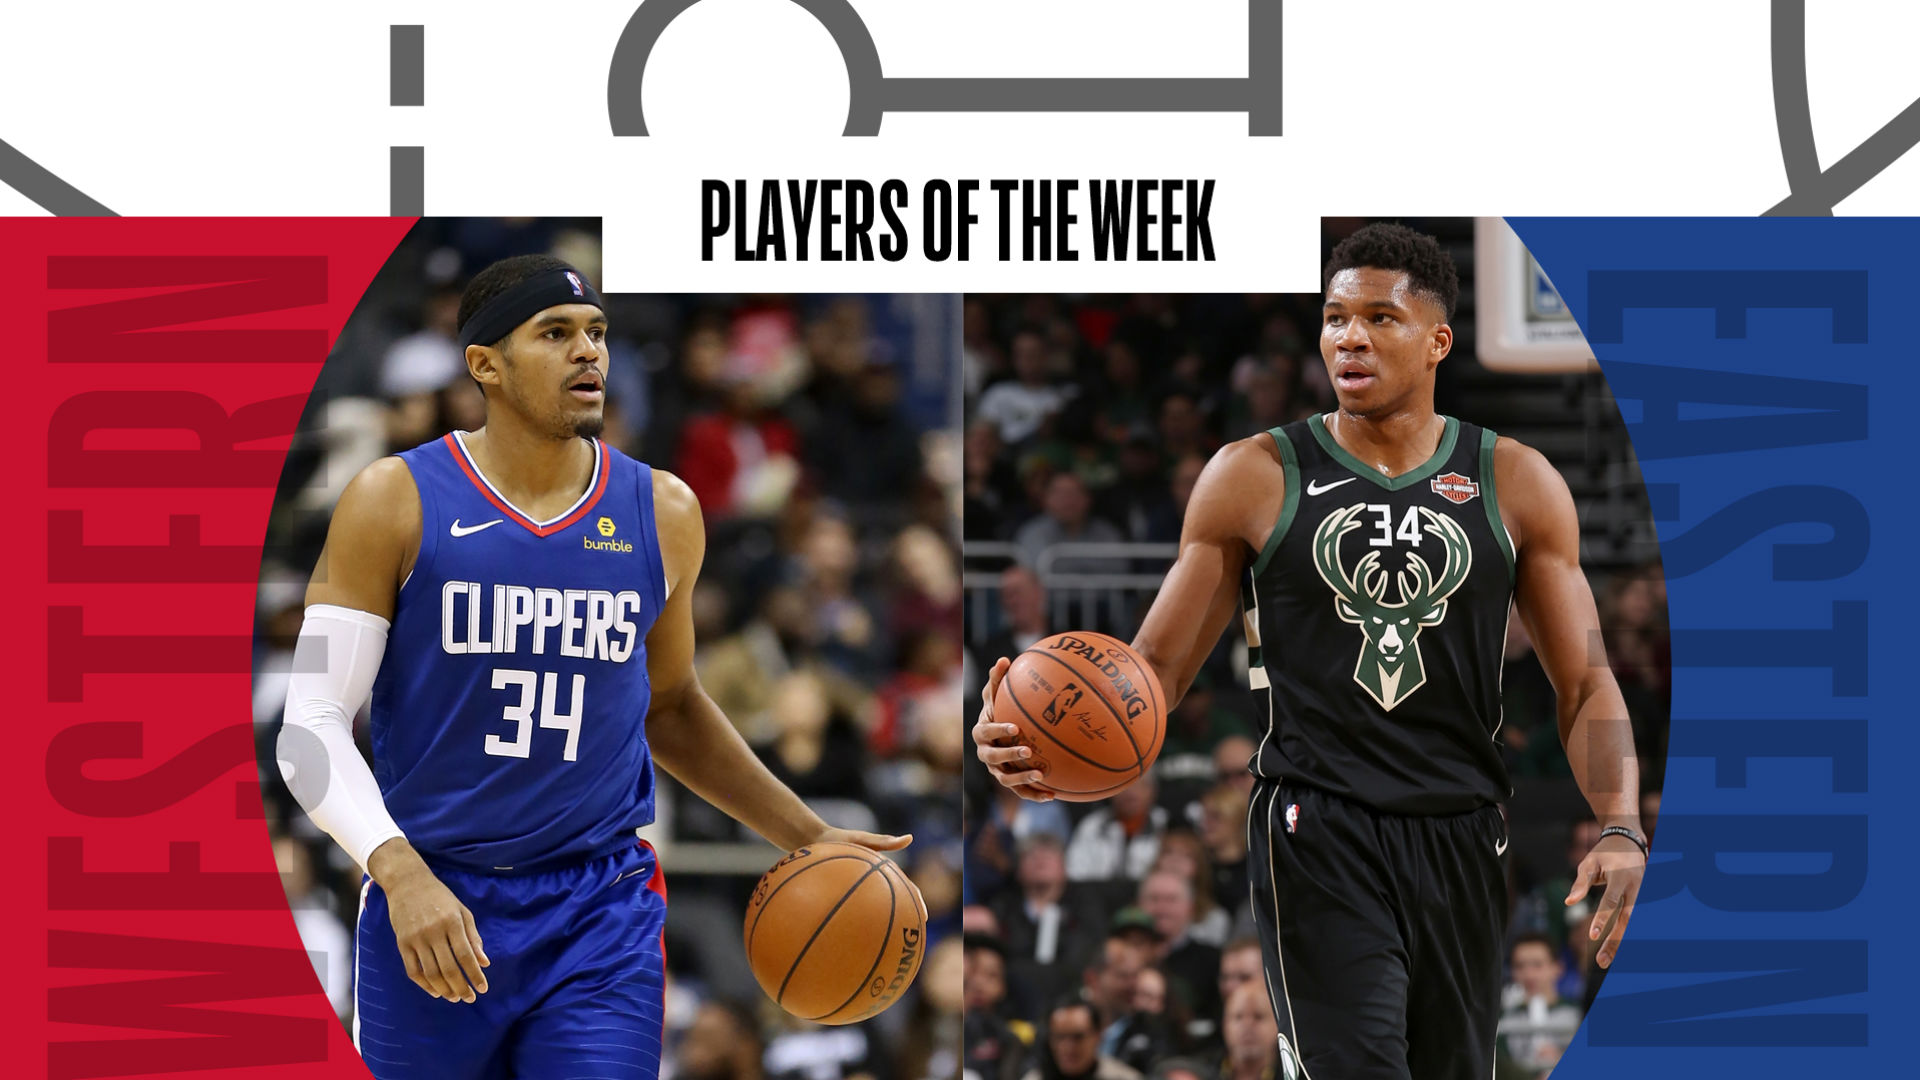 NBA Players of the Week: Bucks' Giannis Antetokounmpo and Clippers' Tobias Harris ...1920 x 1080